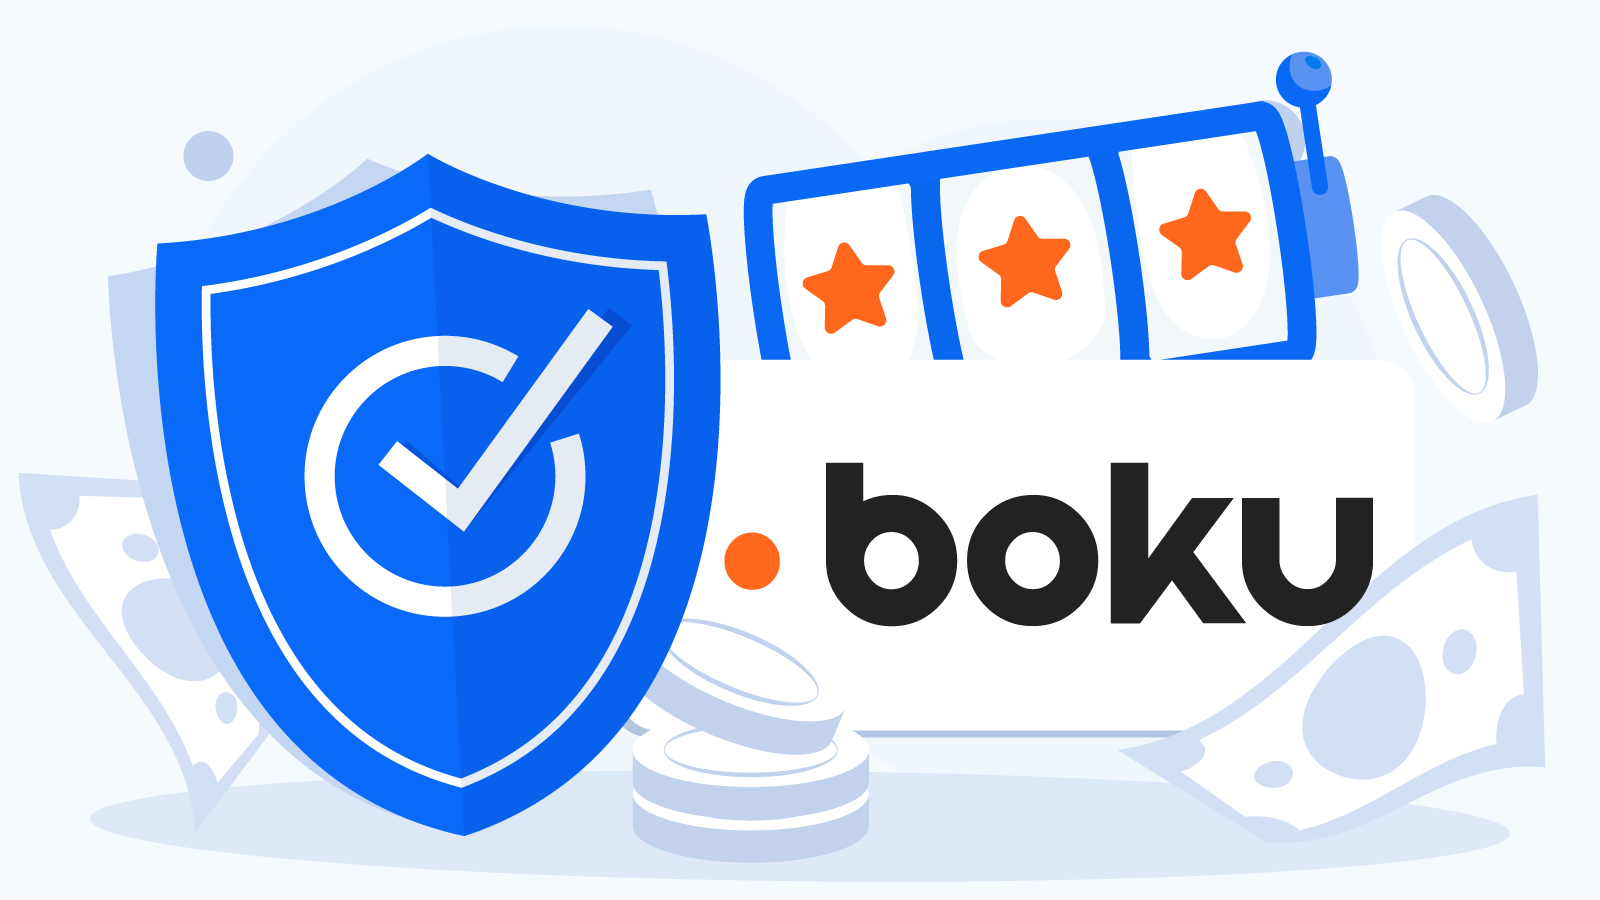 Key Certifications That Validate Boku’s Trust and Safety